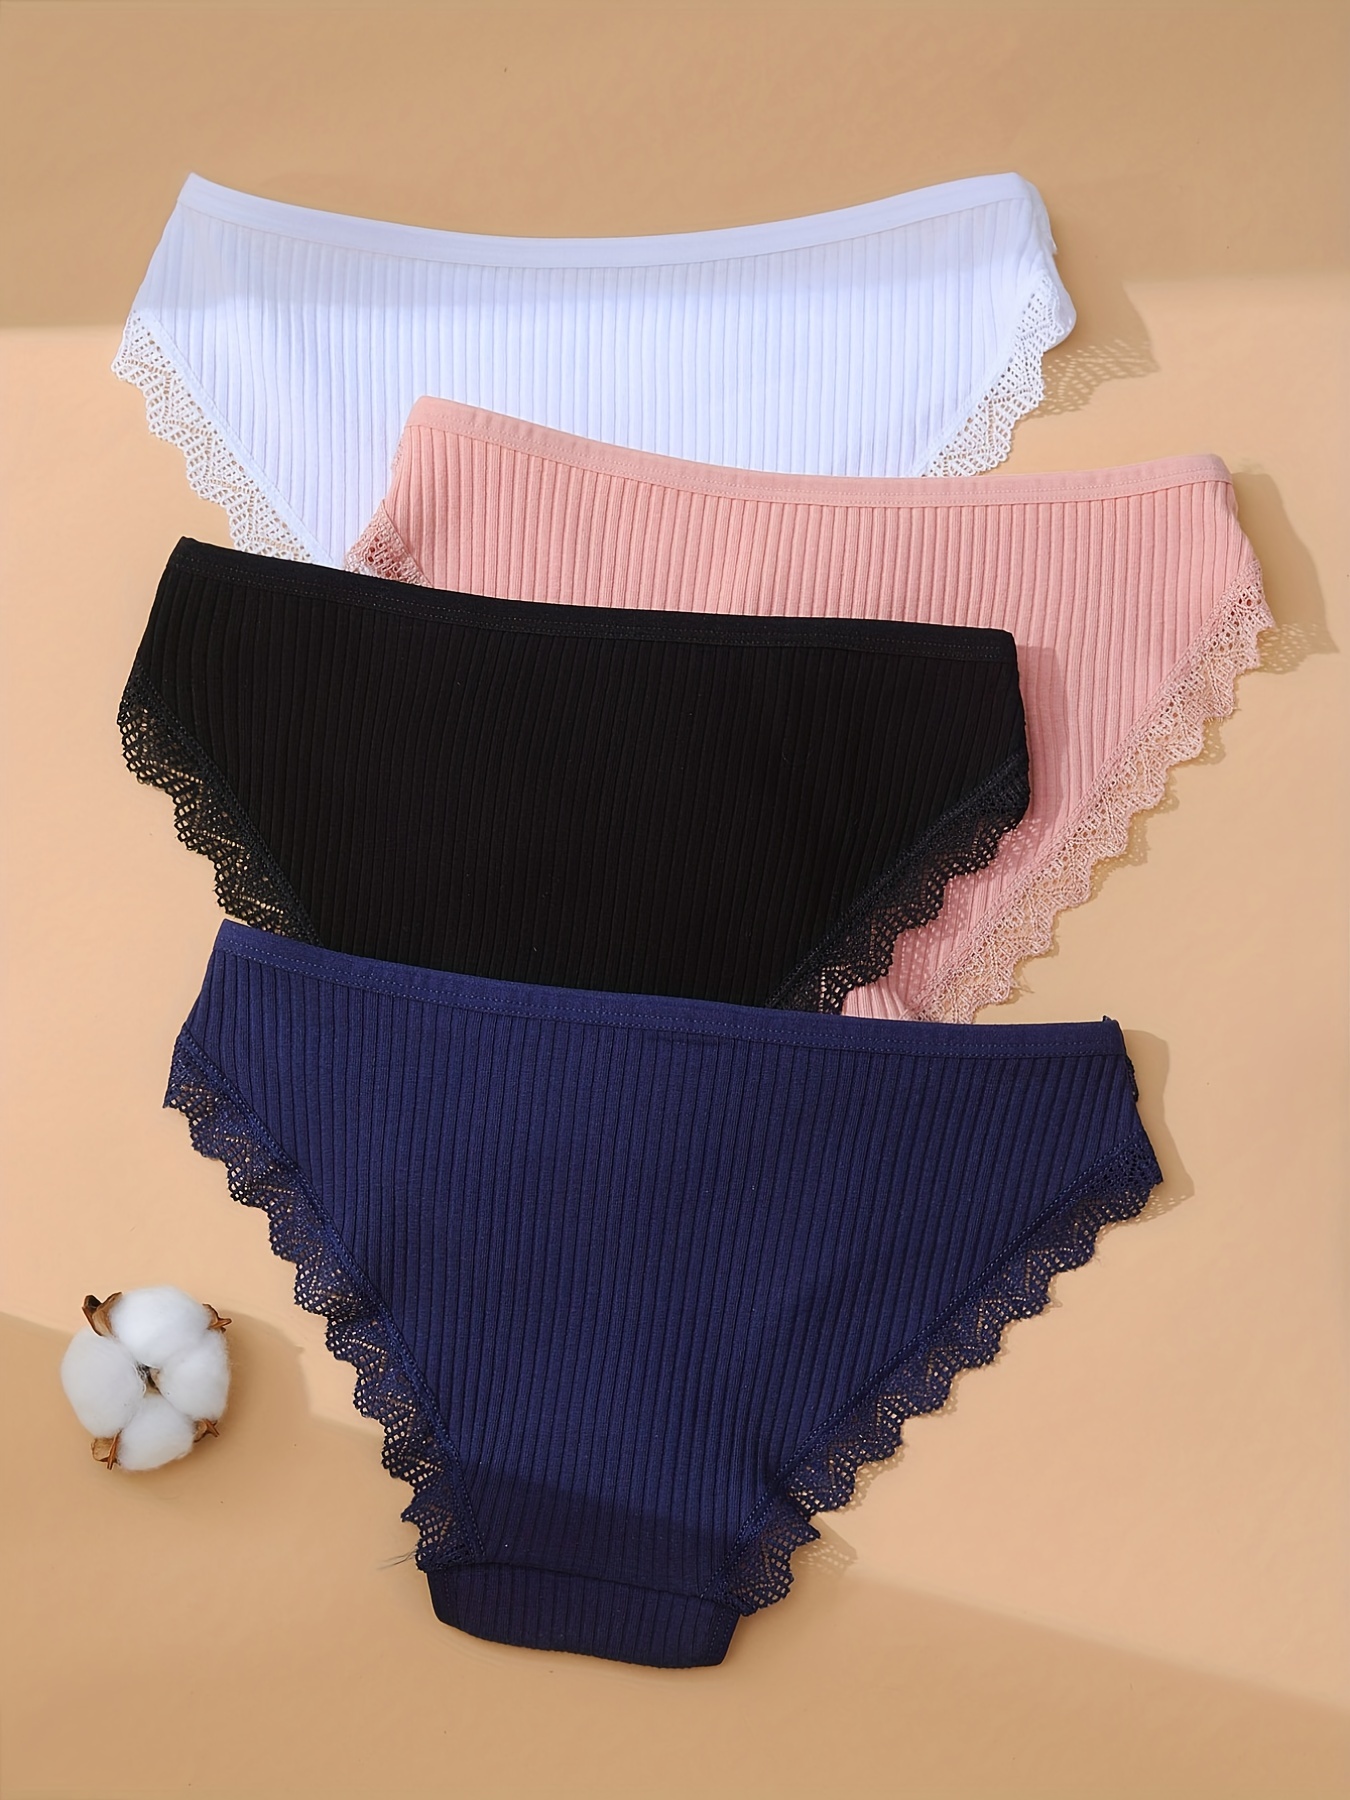 Wholesale Sweet Teens Underwear Cotton, Lace, Seamless, Shaping 